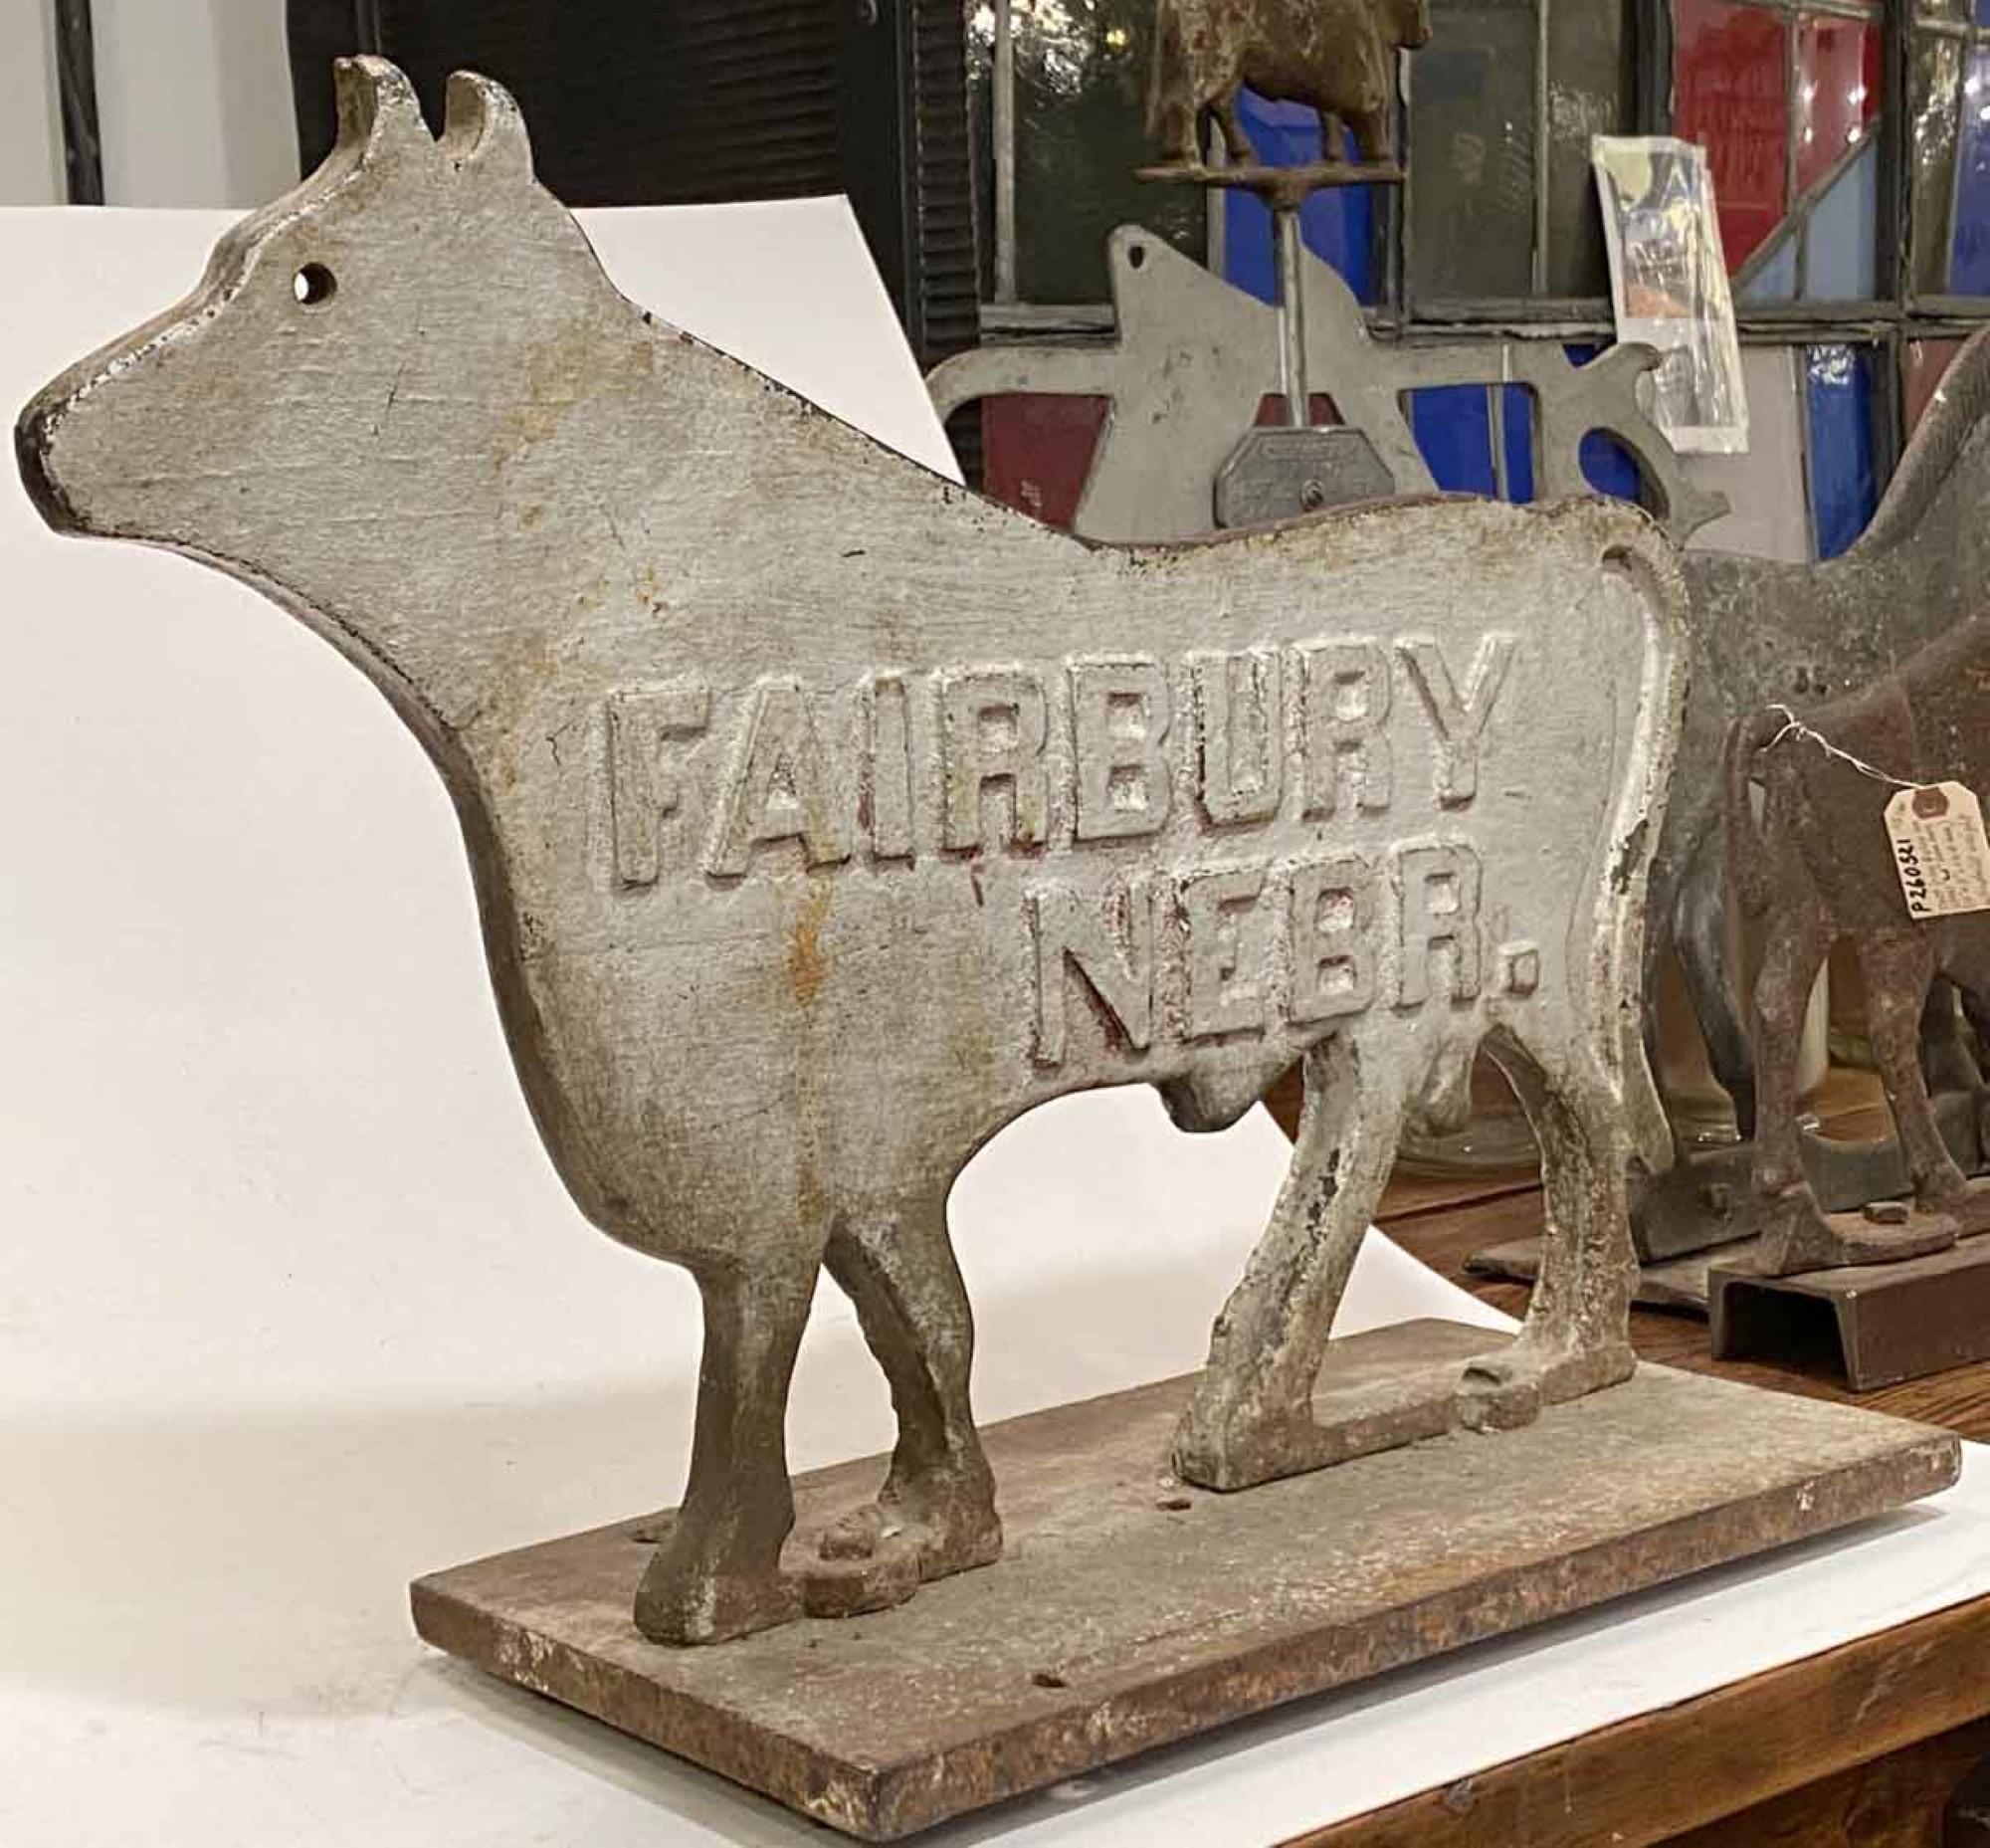 Heavy 1910s antique cast iron cow windmill counterbalance weight painted white. Mounted on the original base. Inscribed Fairbury Nebr. in raised lettering on both sides. These would pivot into the wind to show the wind's direction. Made by Fairbury